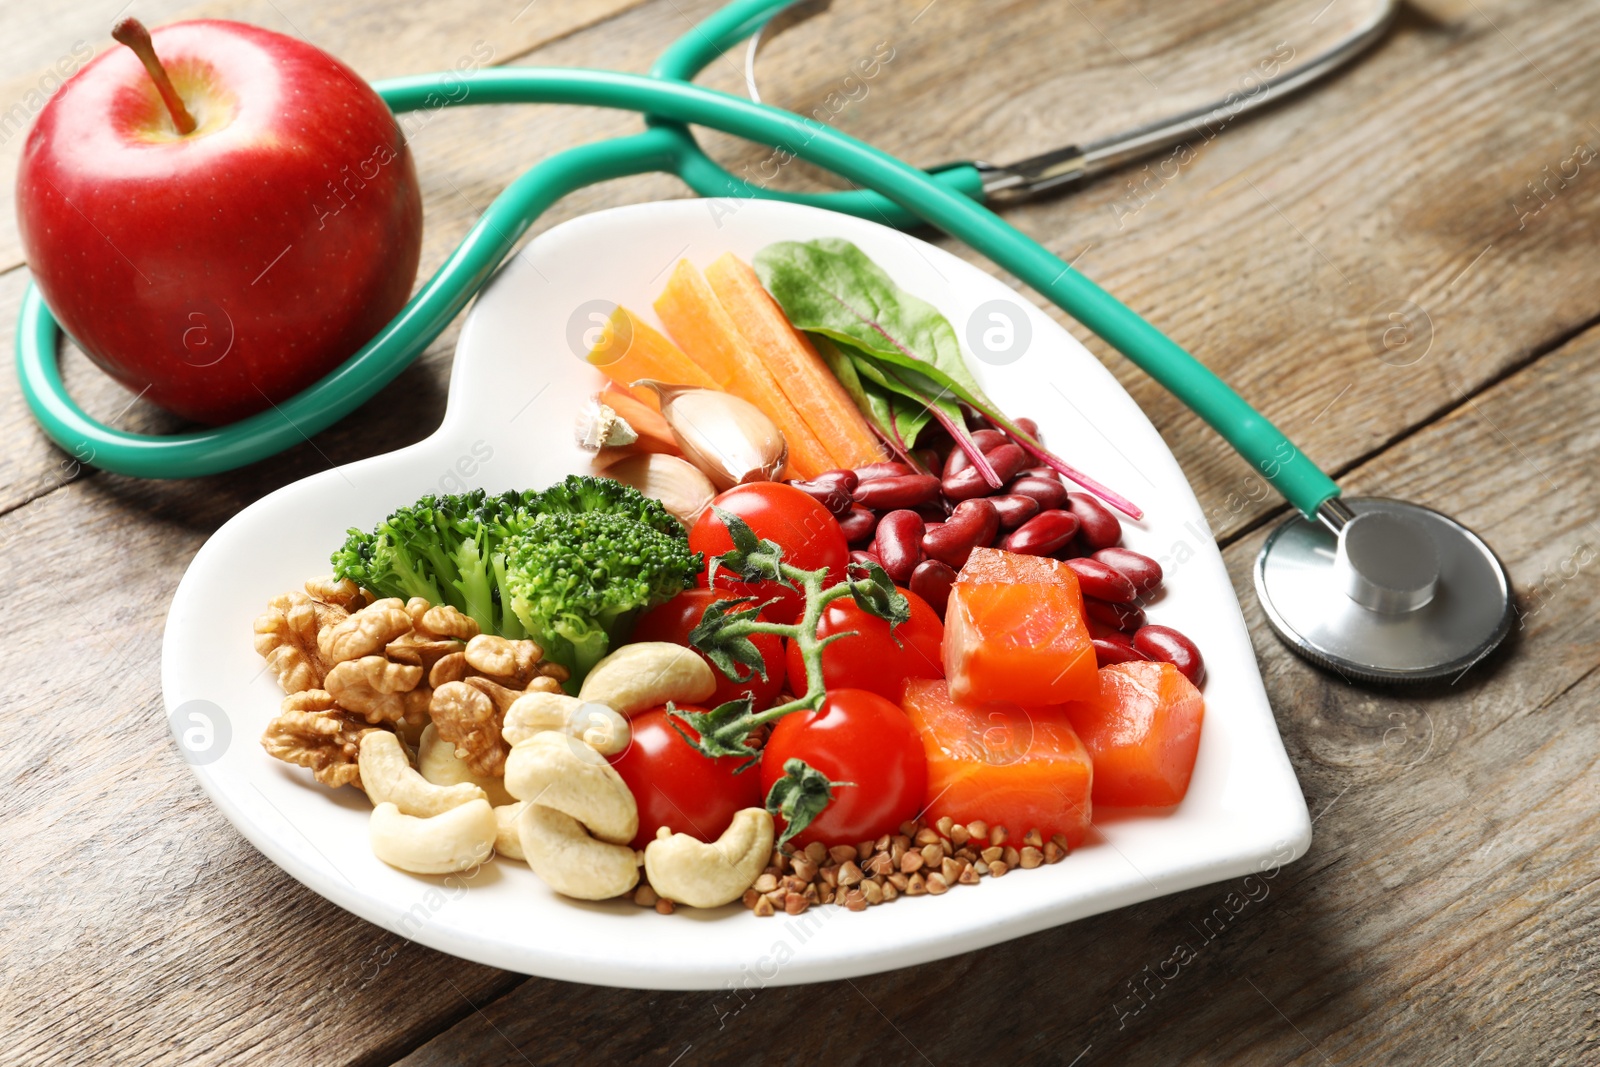 Photo of Plate with products for heart-healthy diet, apple and stethoscope on wooden background